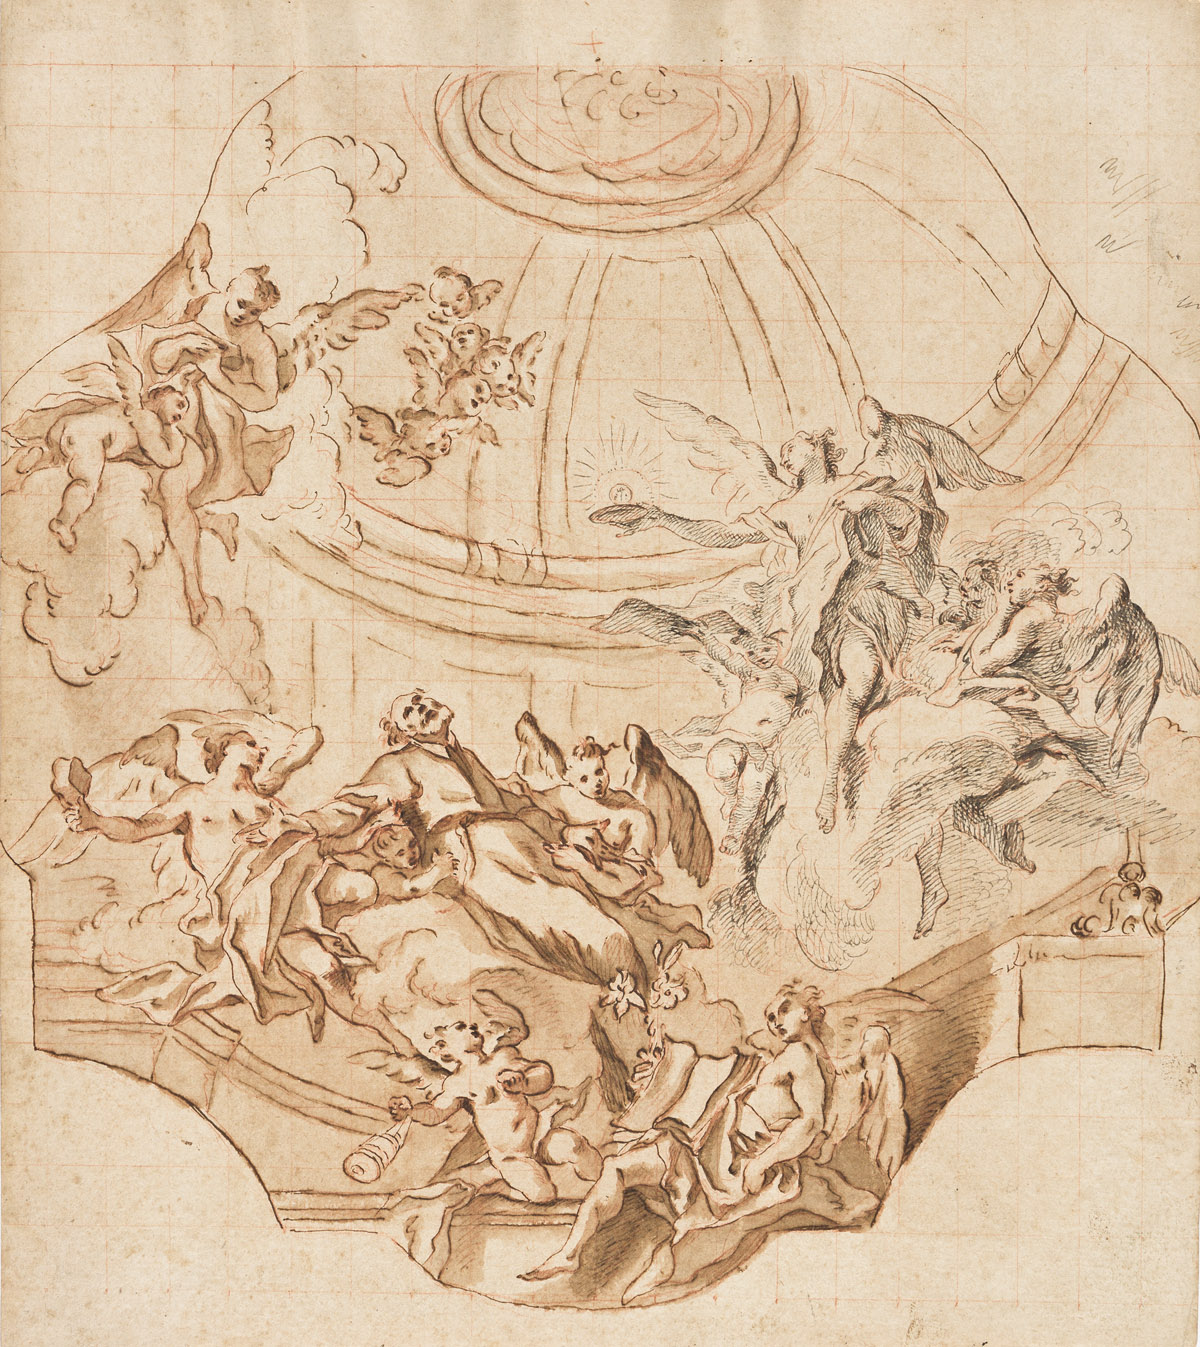 IGNAZIO STERN (ATTRIBUTED TO) (Mauerkirchen 1679-1748 Rome) A Saint Carried to Heaven by Angels and Cherubs, Study for a Dome Decoratio